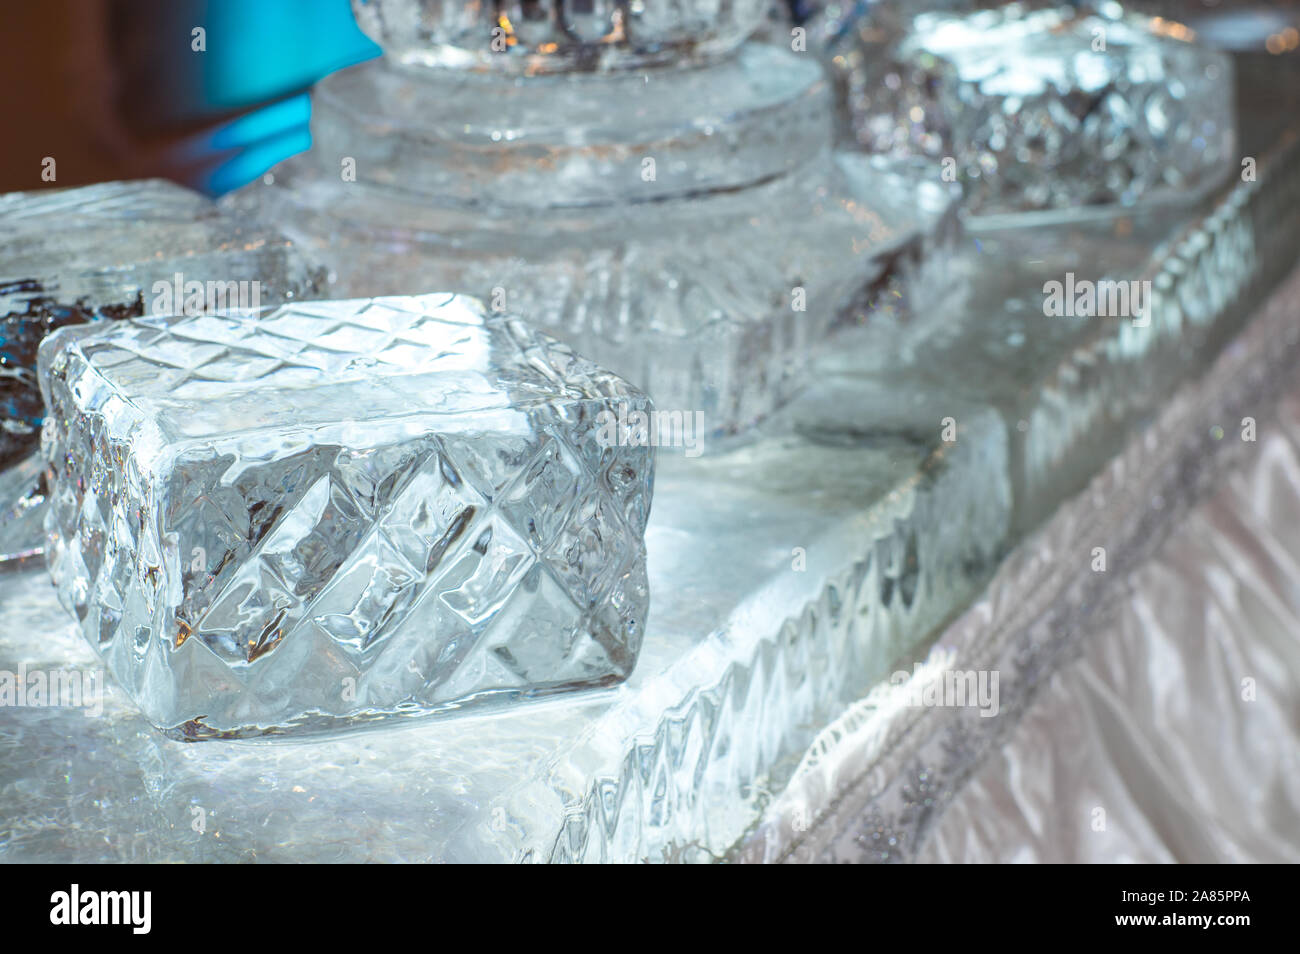 Wedding decorations with ice on table Stock Photo